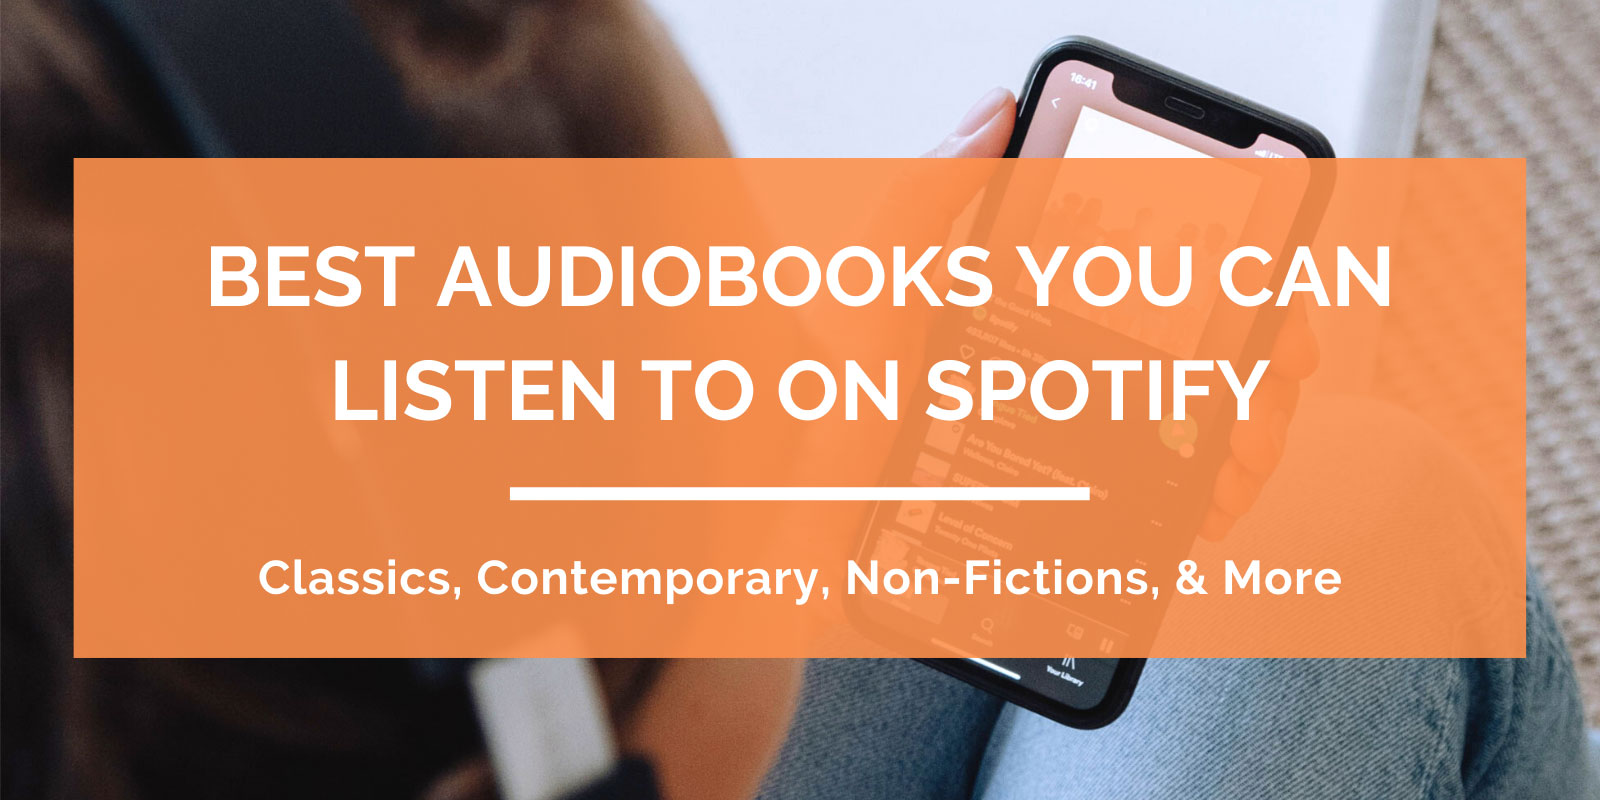 Best Audiobooks You Can Listen To On Spotify